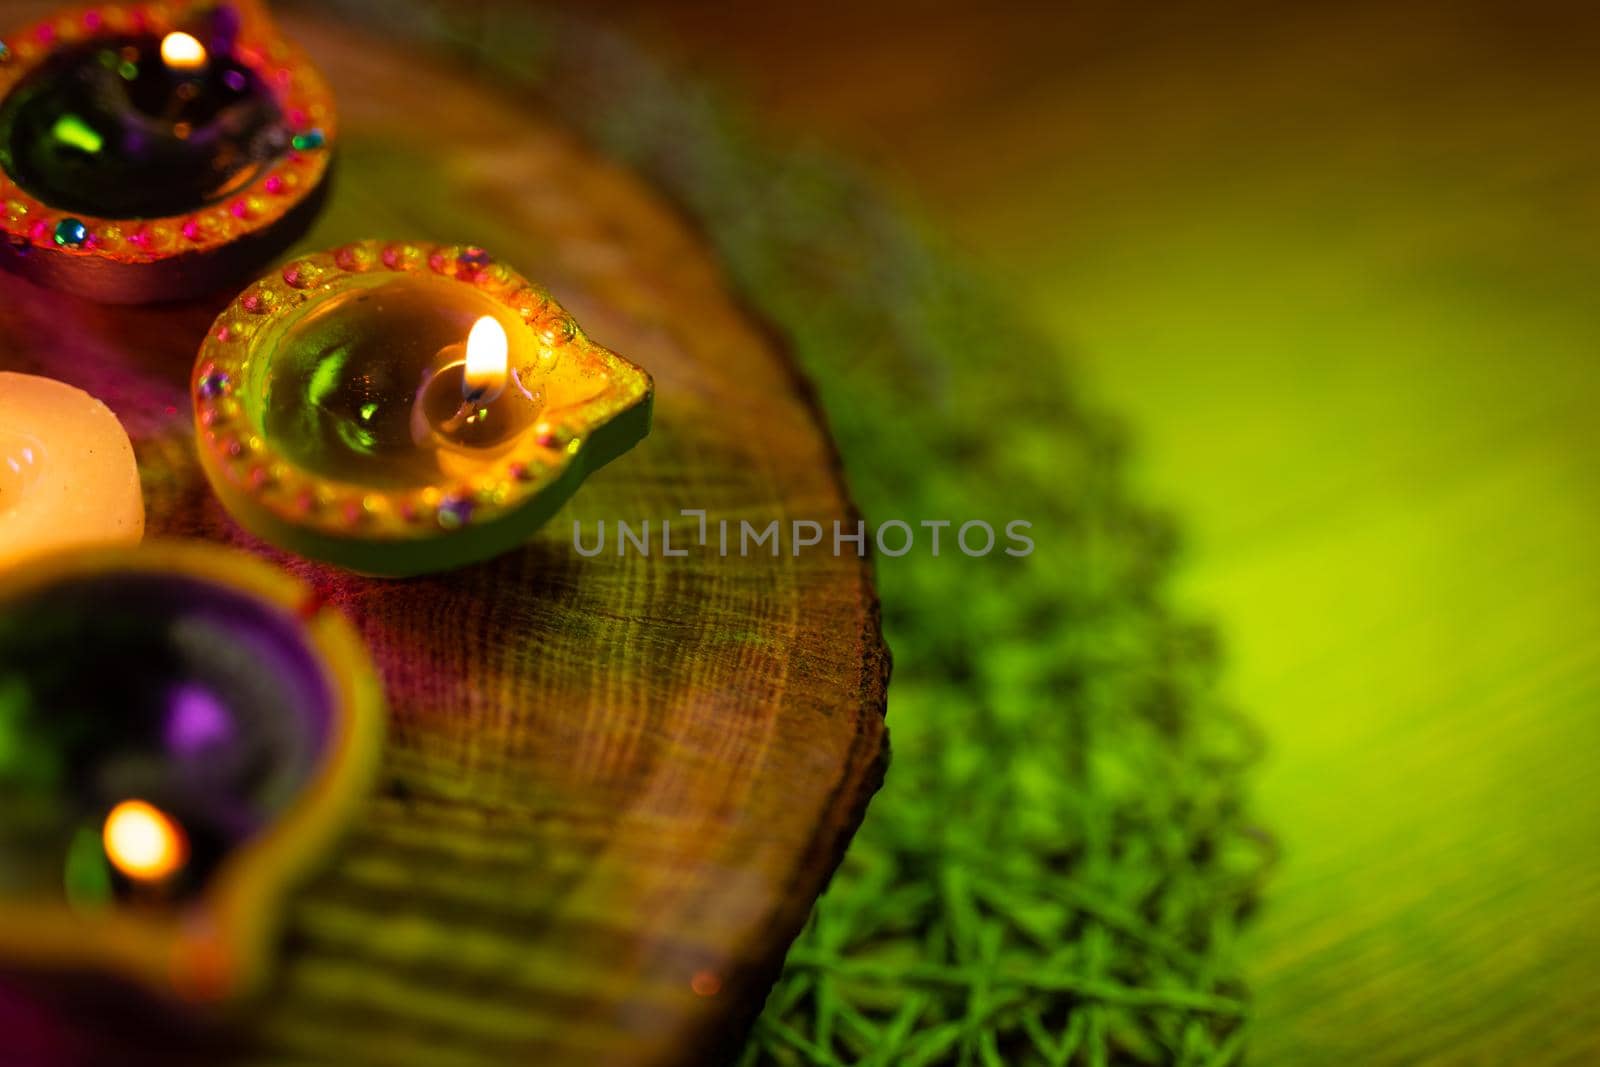 Lit candles in small decorative clay pots and tea light candle burning on round wooden board. celebration, religion, tradition and ceremony concept.